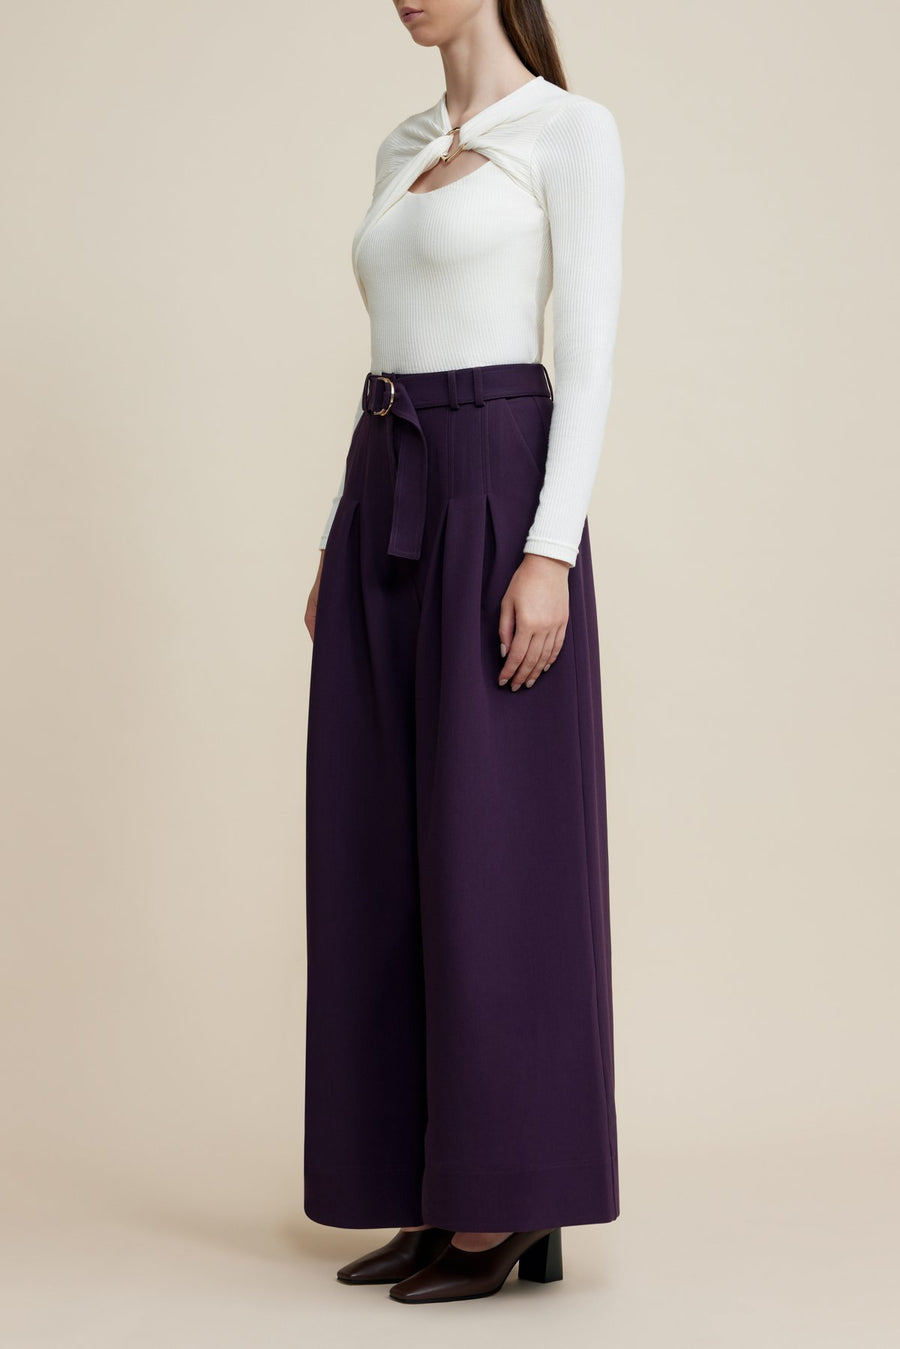 Top more than 74 blackberry trousers buy online - in.cdgdbentre